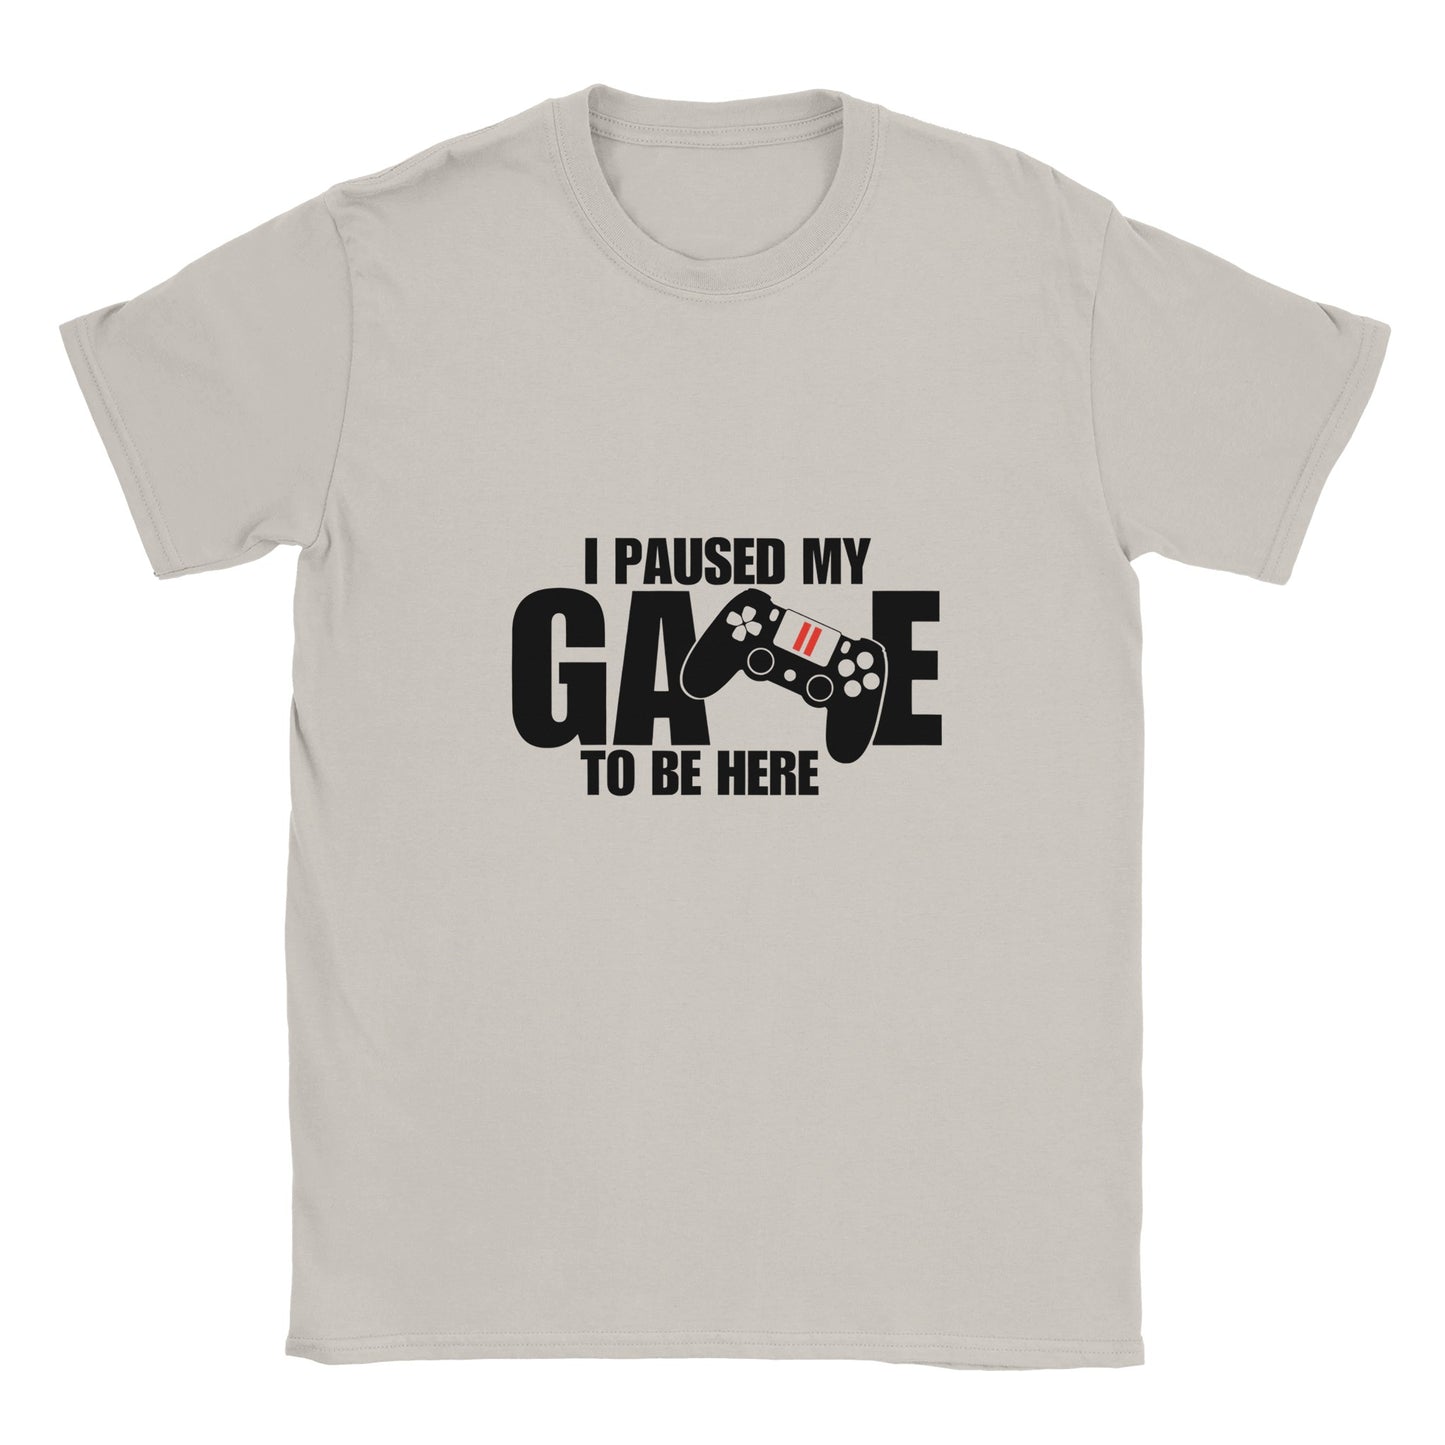 Unisex T-Shirt I paused my Game to Be Here, Funny Shirt, Gamer Gift, Gaming T-Shirt, Funny Gaming T-shirt, Gaming Present